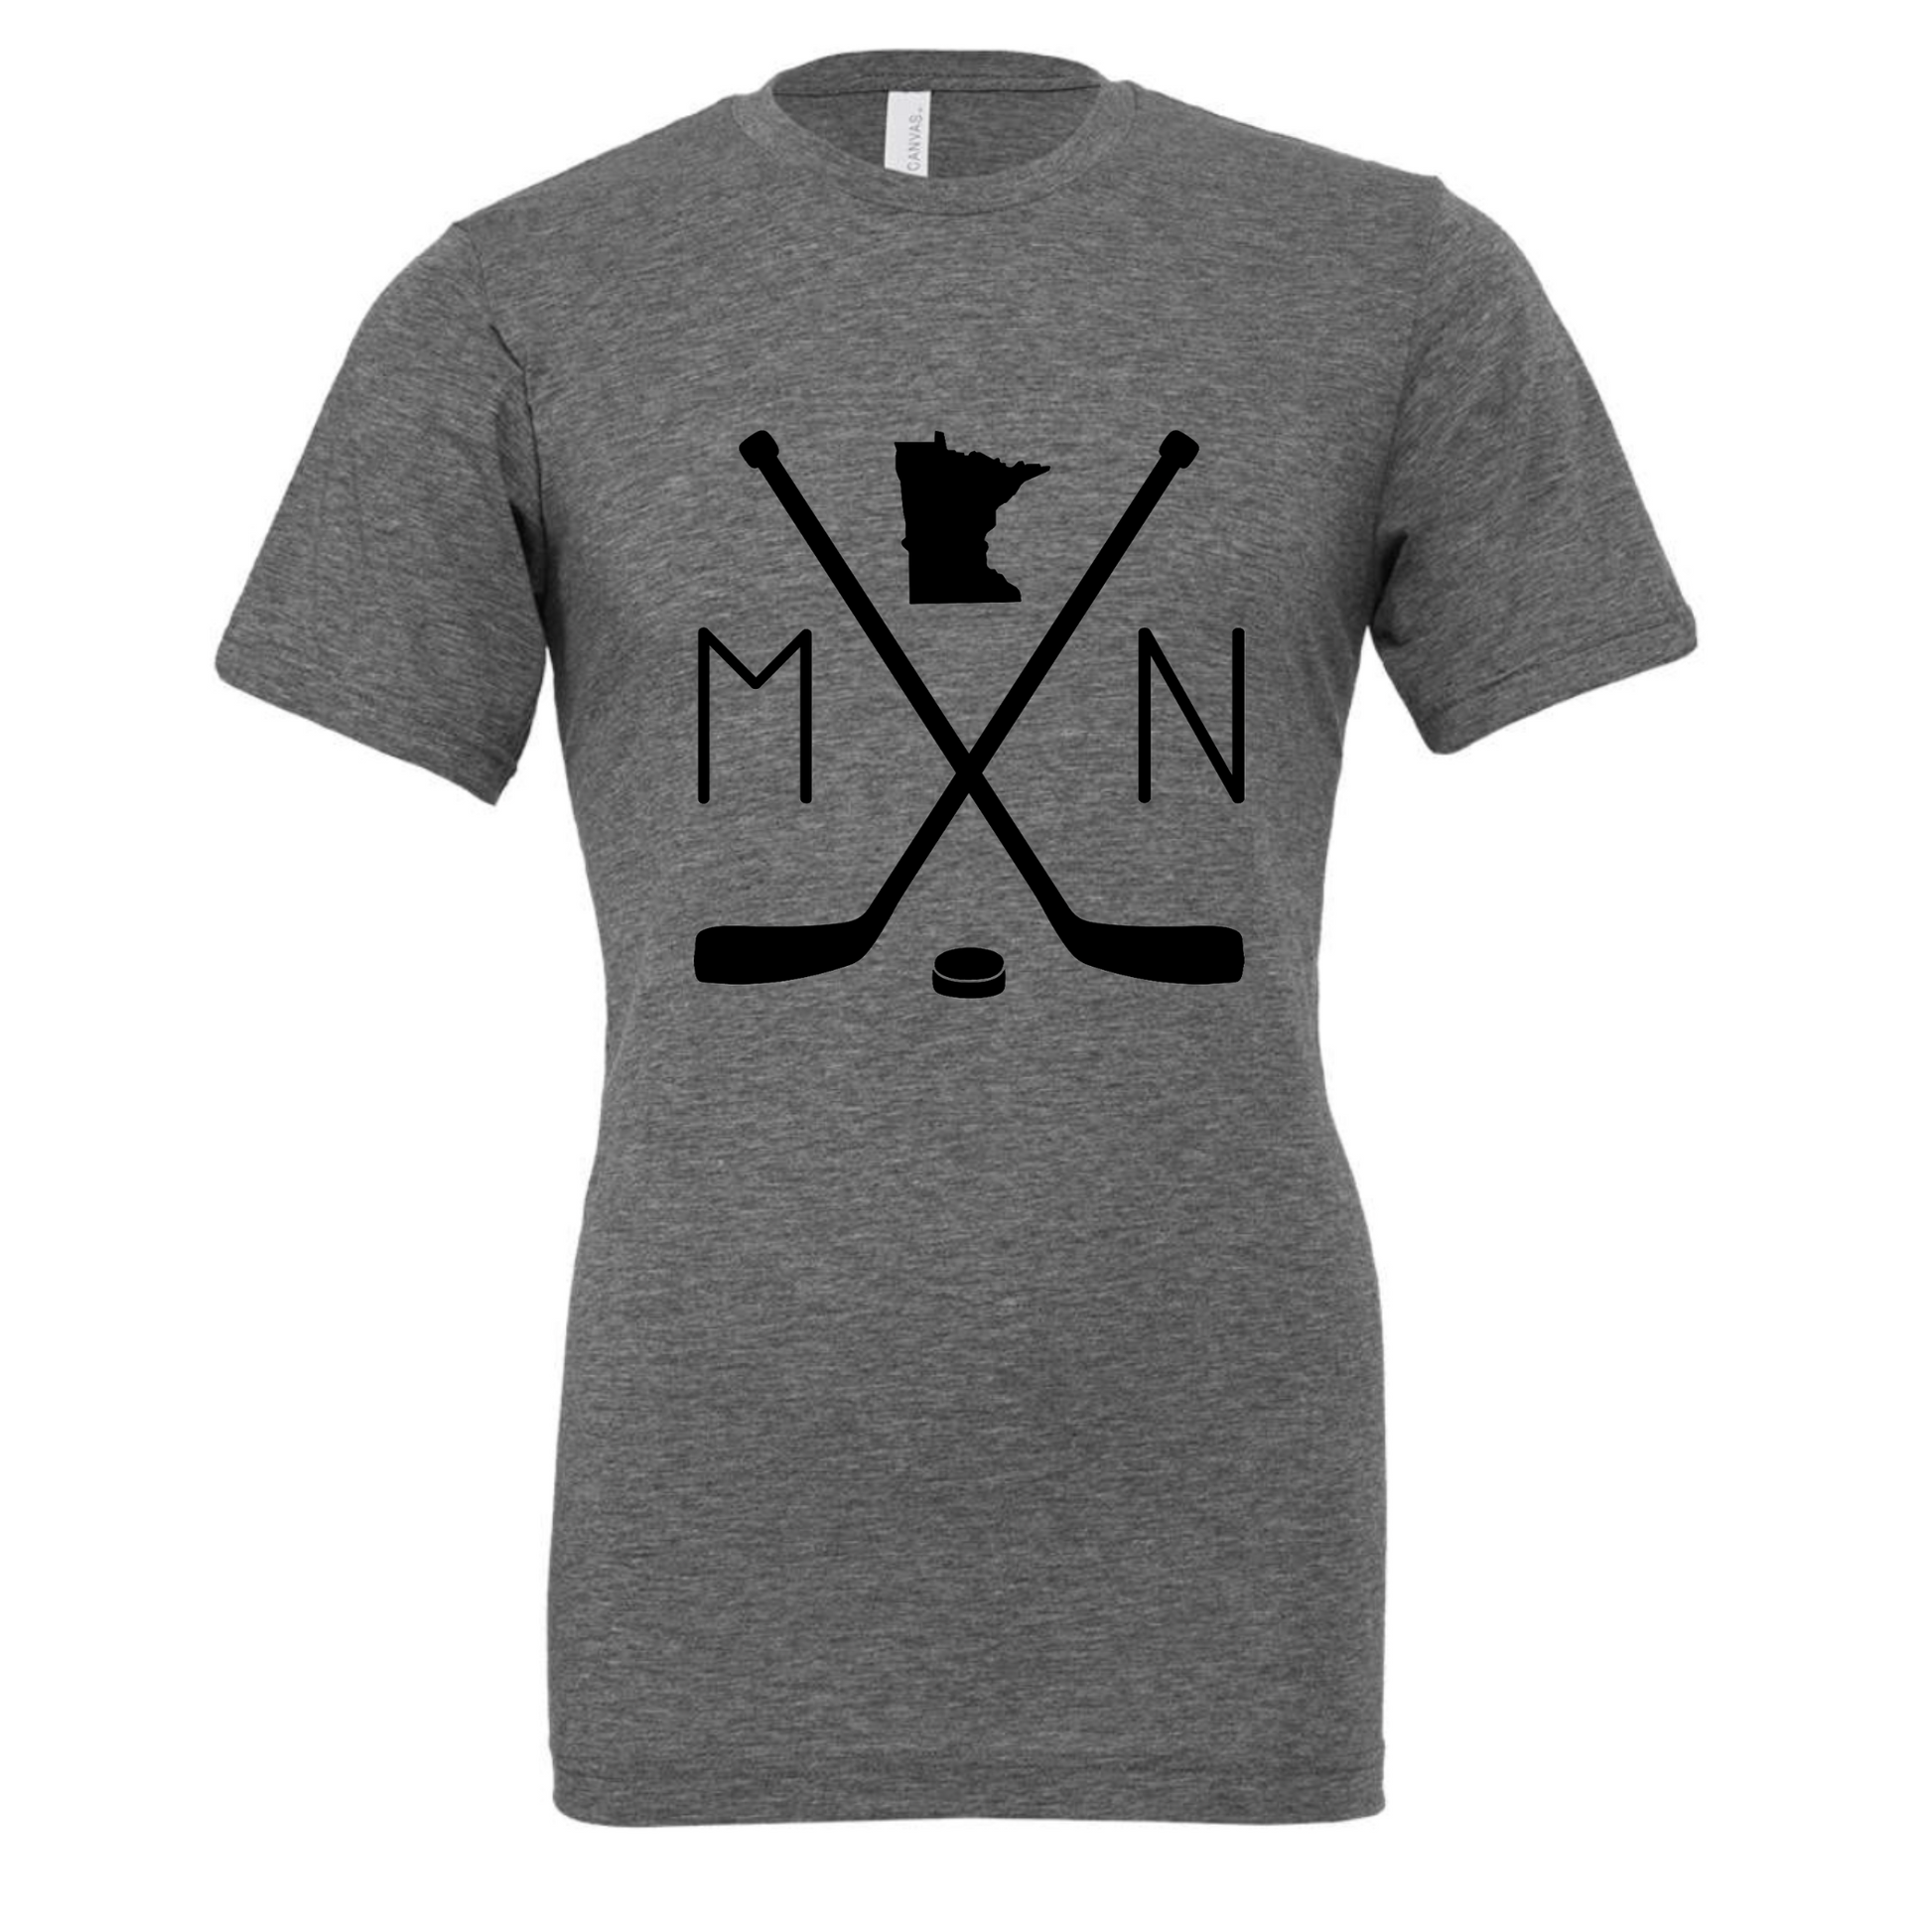 Heather Gray Minnesota Hockey T-Shirt. On the front has a black design with to hockey sticks faced like an X with a puck below in. An M to the left, an N to the right, and an outline of the state of minnesota up top. This is the front view of the shirt.